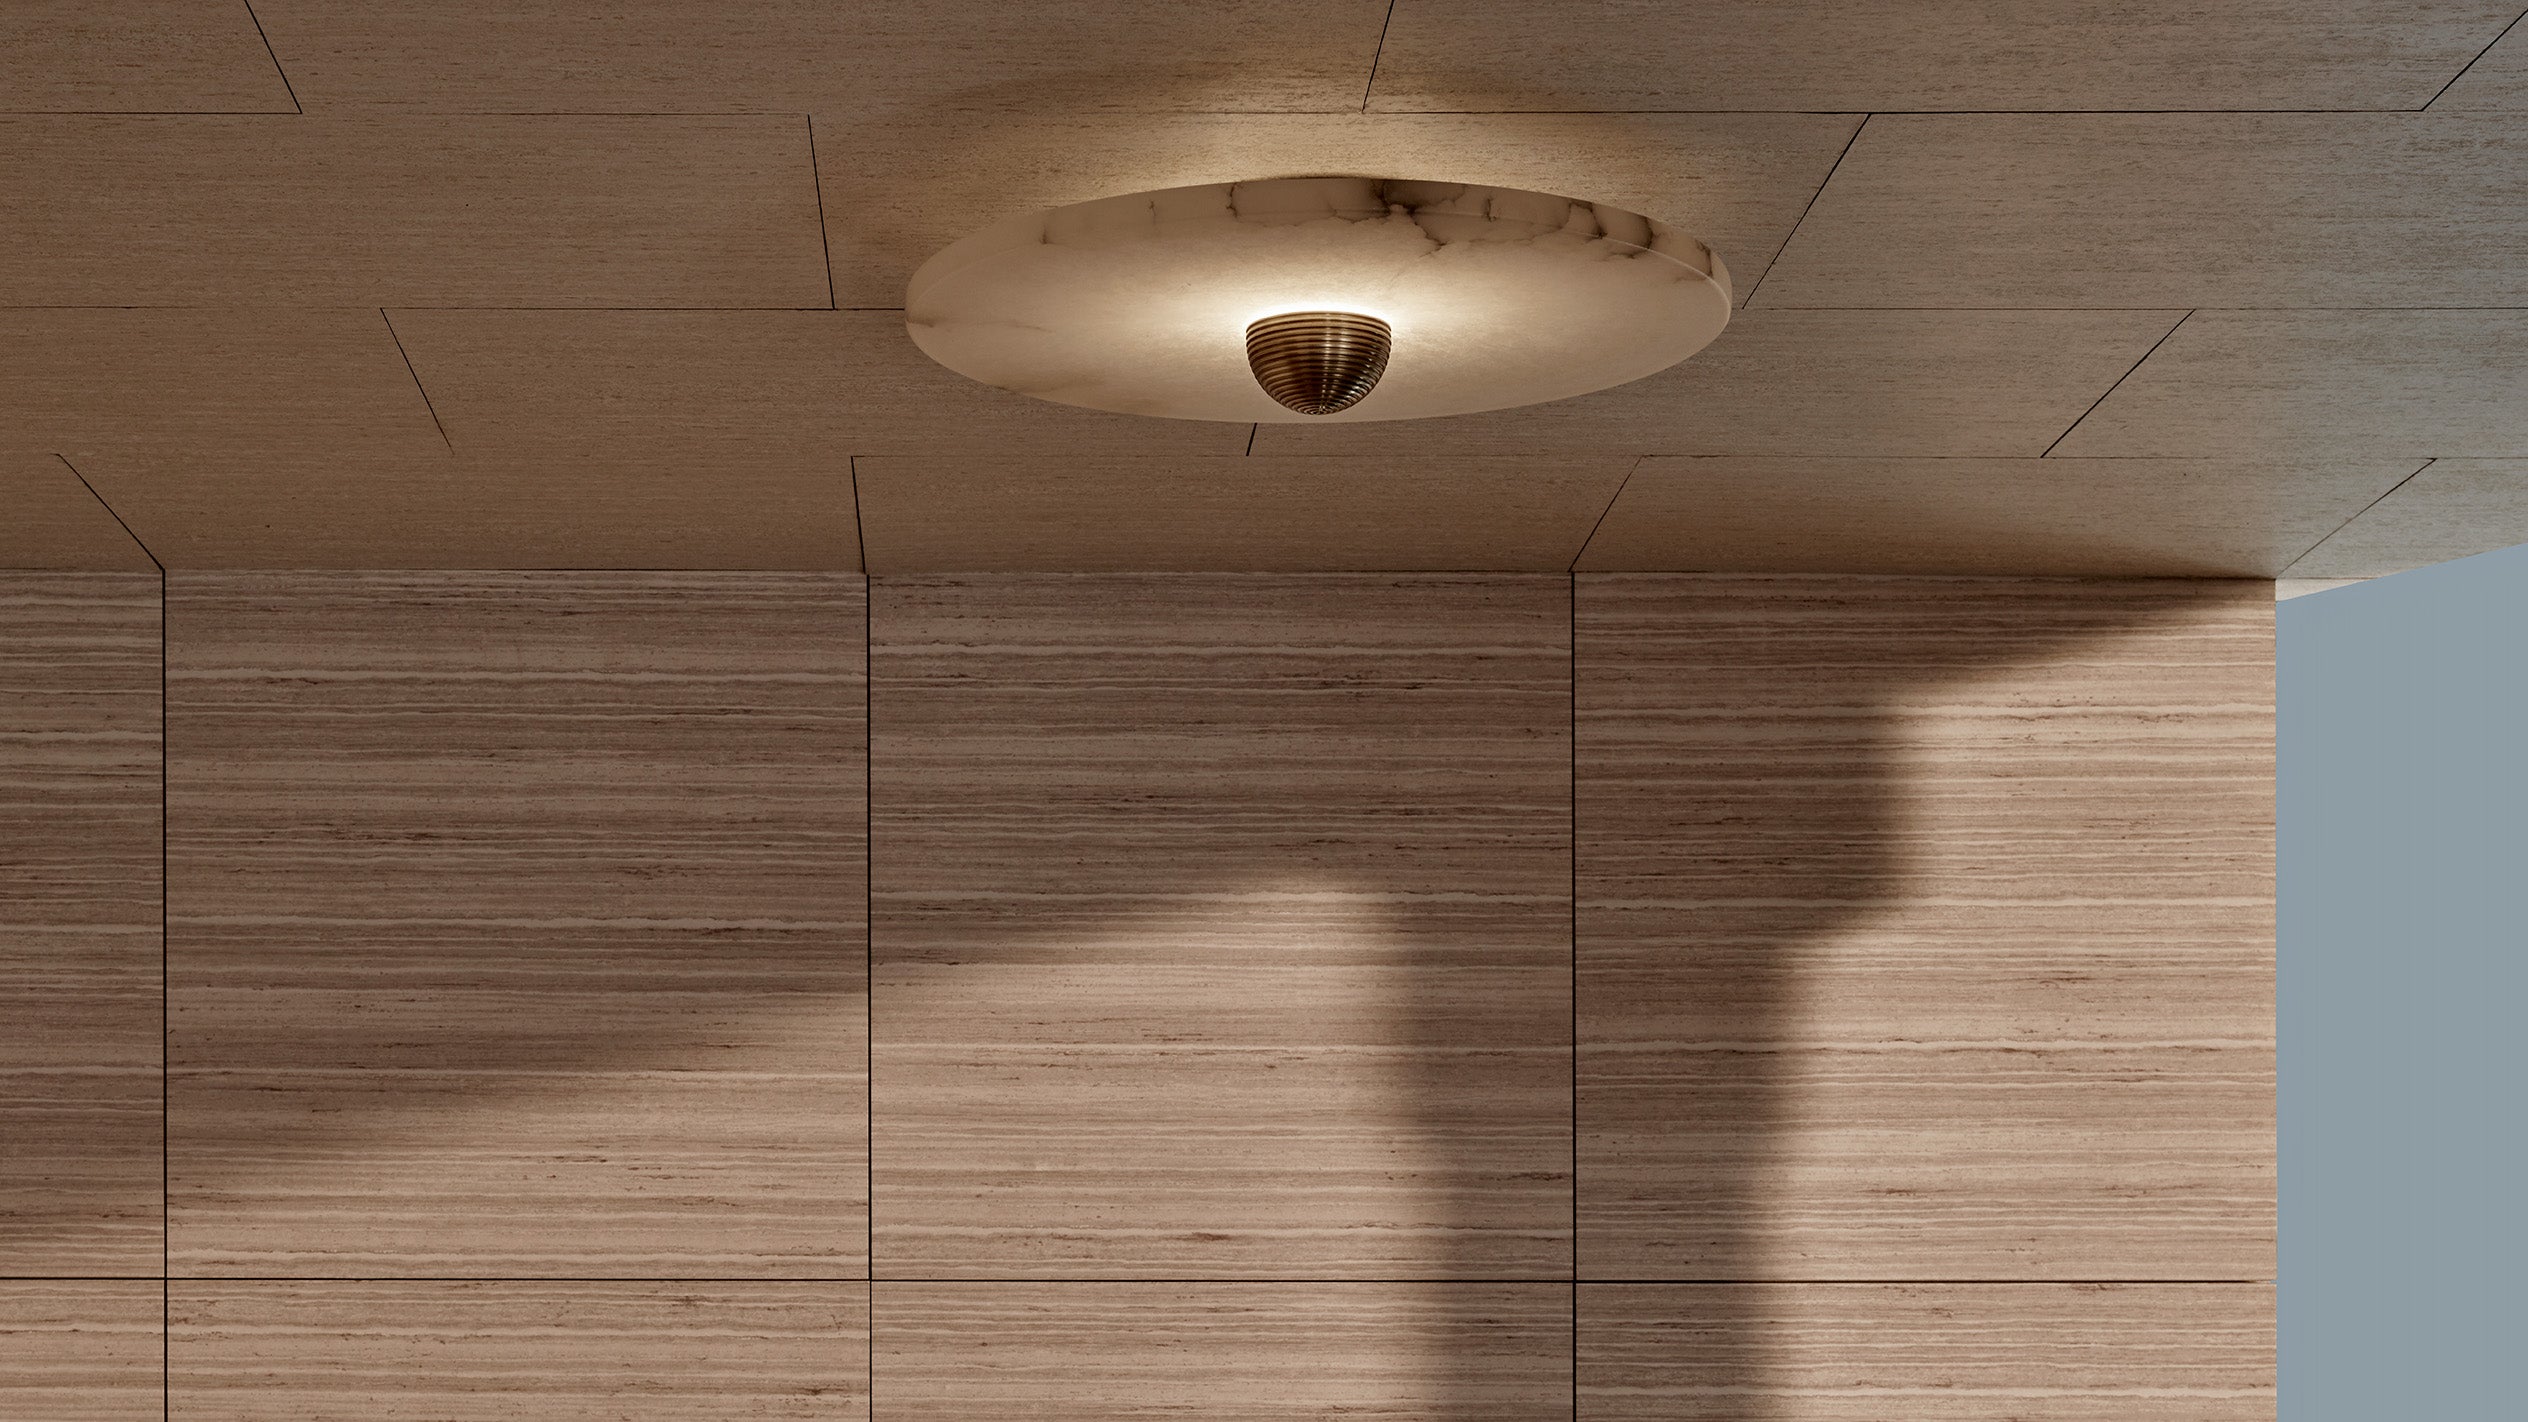 An illuminated MEDIAN : 1 surface light in Aged Brass finish mounted to a ceiling.